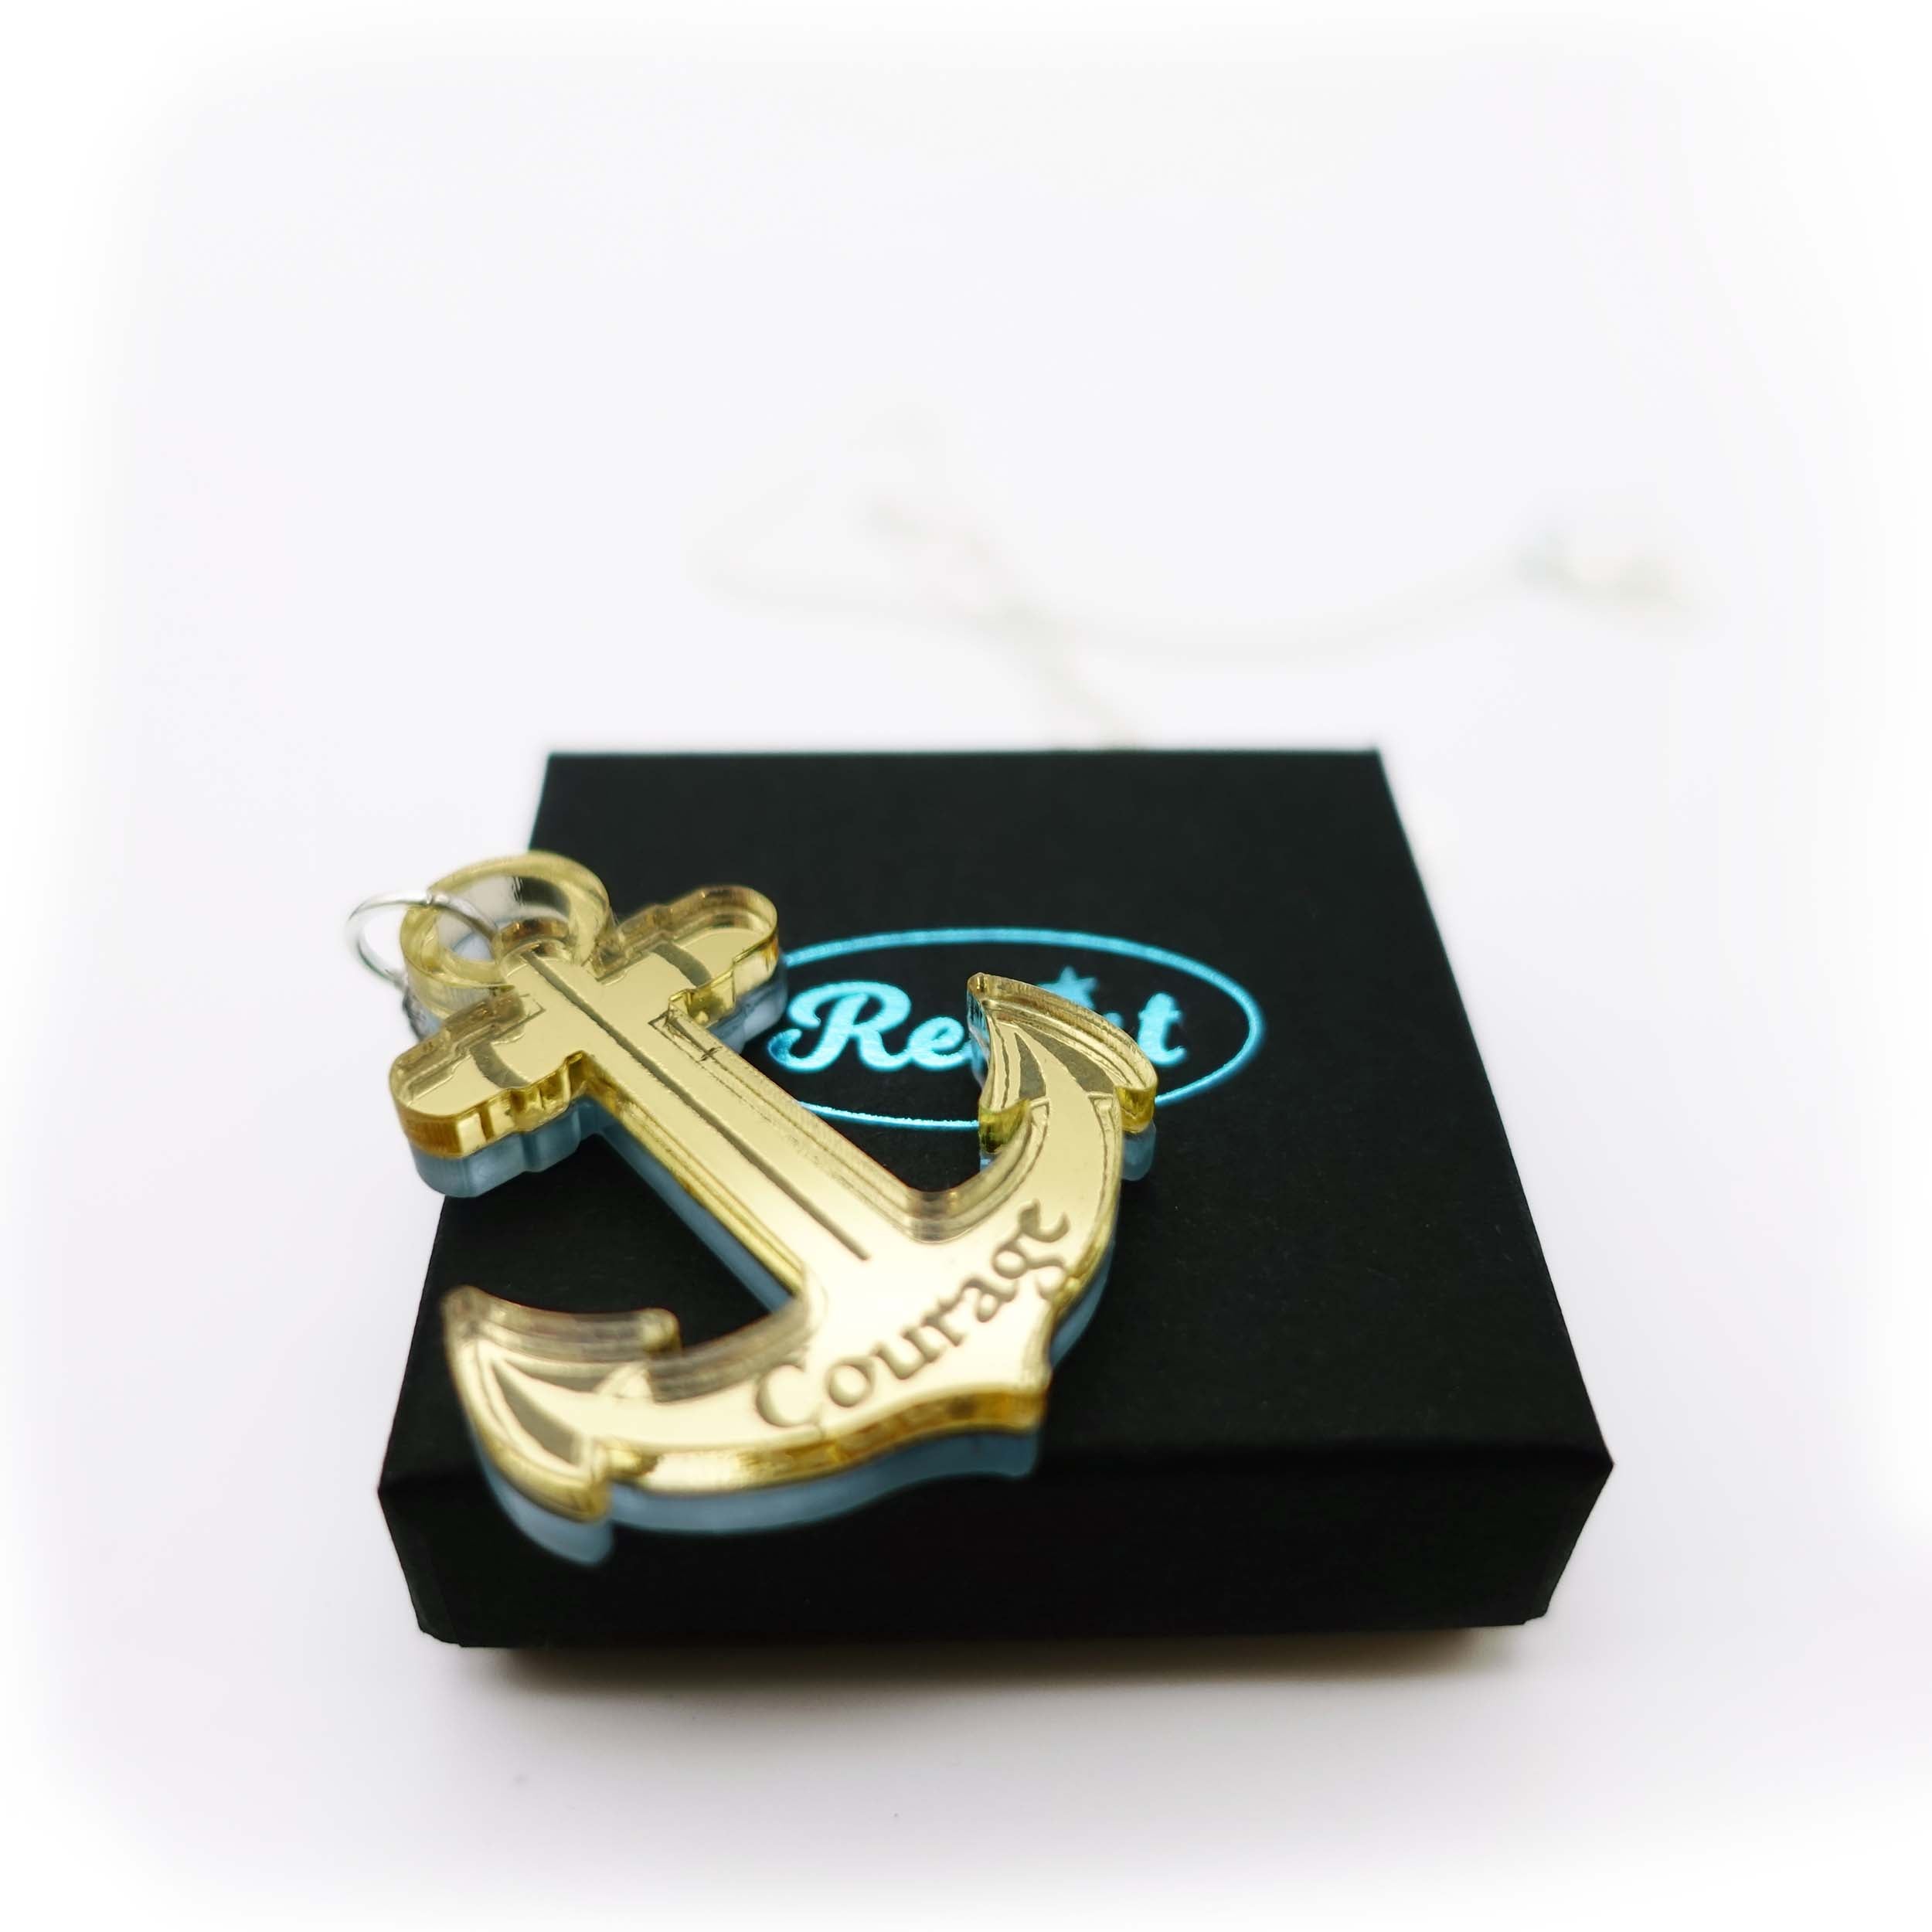 Gold engraved courage anchor pendant shown on the small gift box. £4 from the sale of each will be split equally between the RNLI and Women for Refugee Women. 